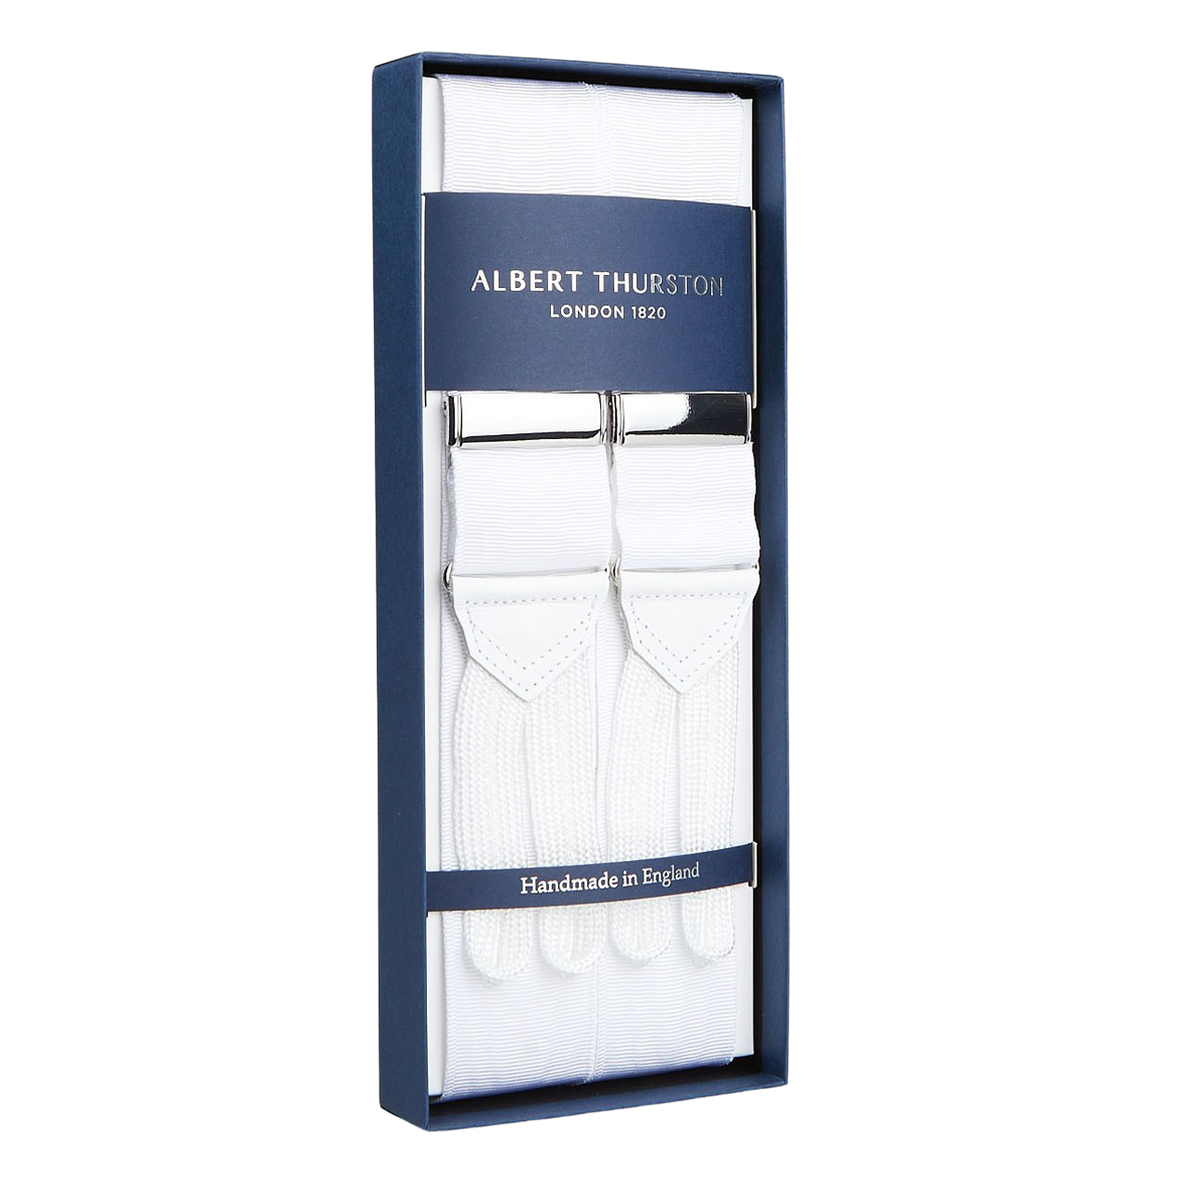 Elegant White James Bond Moiré 38 mm Braces by Albert Thurston, a black-tie accessory displayed in an open gift box.